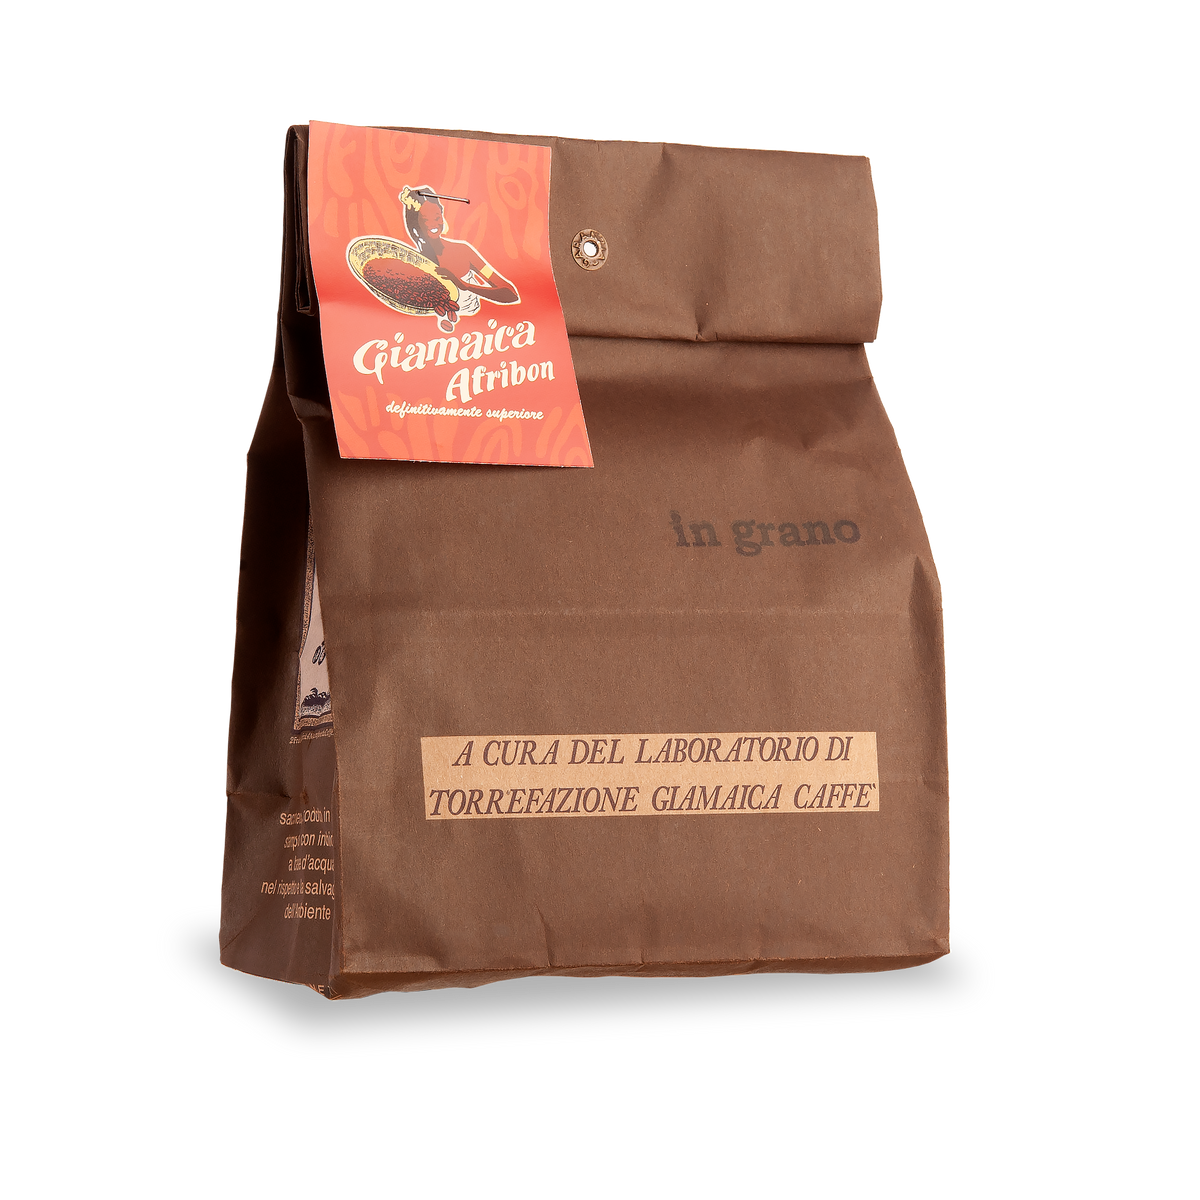 Coffee Afribon Moka Grind 4 x 250g - PRE-ORDER - Contact us for further information (indulge@flemmings.wine)